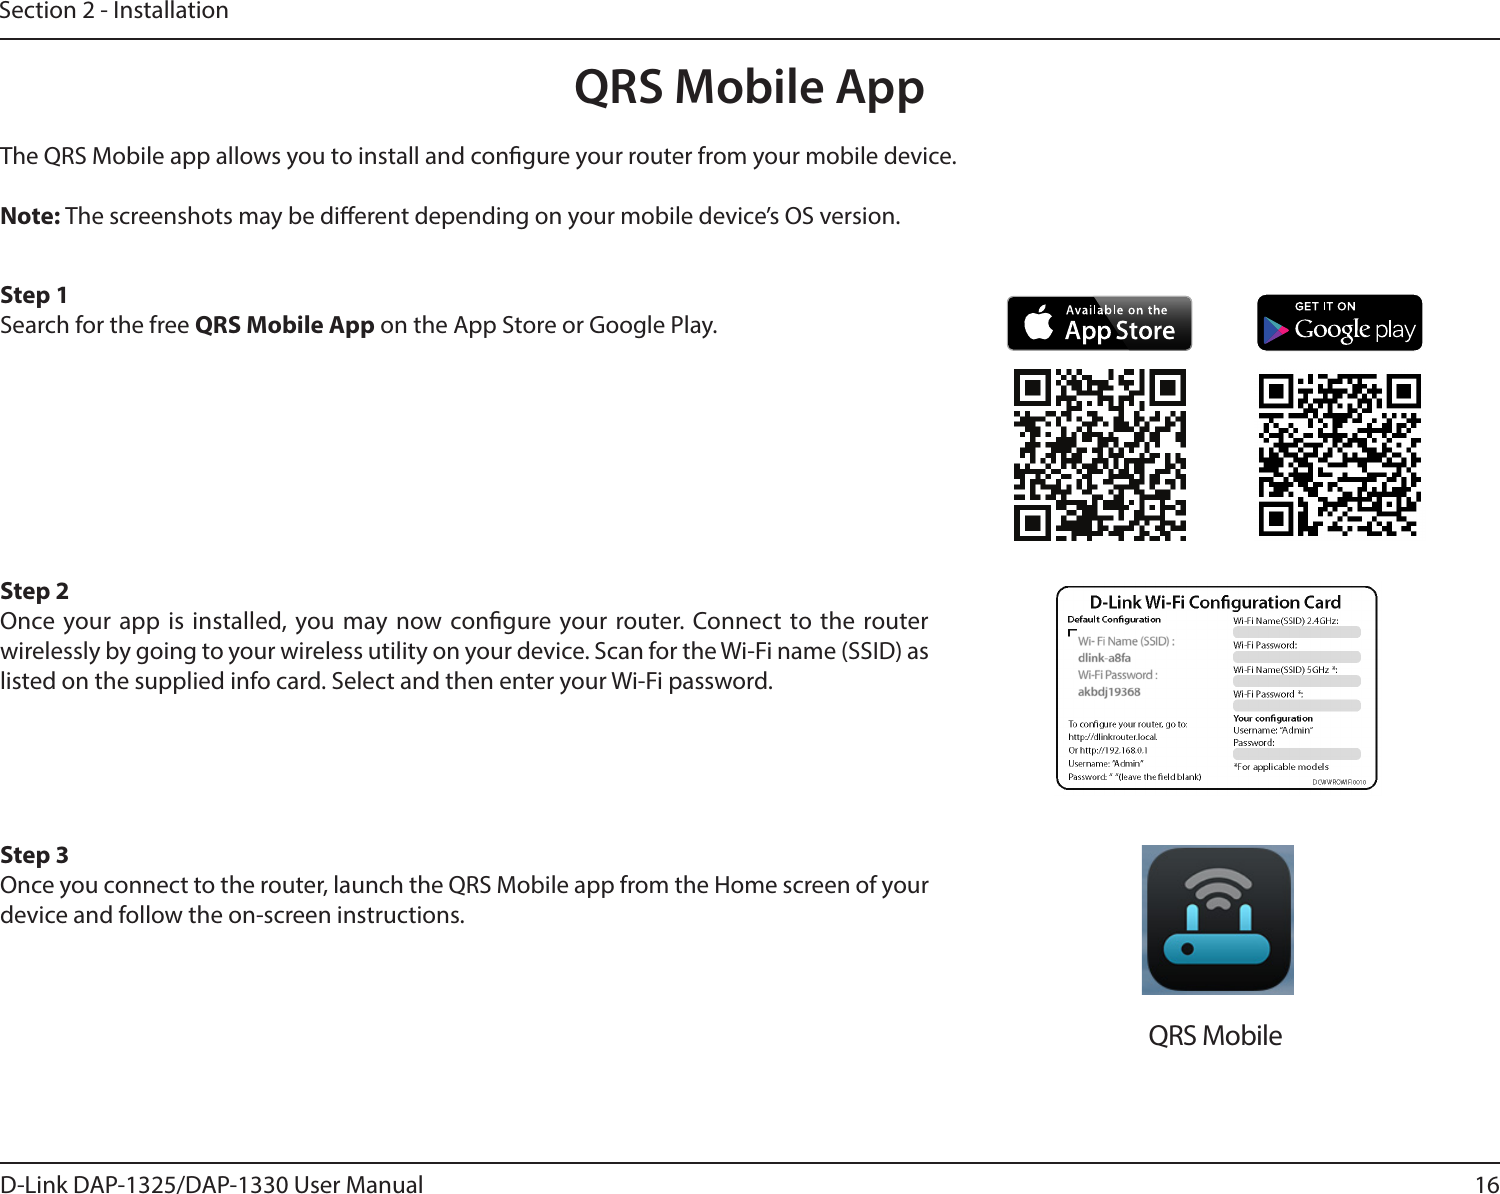 16D-Link DAP-1325/DAP-1330 User ManualSection 2 - InstallationQRS Mobile AppThe QRS Mobile app allows you to install and congure your router from your mobile device.Note: The screenshots may be dierent depending on your mobile device’s OS version. Step 1Search for the free QRS Mobile App on the App Store or Google Play.Step 2Once your app is installed, you may now congure your router. Connect to the router wirelessly by going to your wireless utility on your device. Scan for the Wi-Fi name (SSID) as listed on the supplied info card. Select and then enter your Wi-Fi password.Step 3Once you connect to the router, launch the QRS Mobile app from the Home screen of your device and follow the on-screen instructions.QRS Mobile